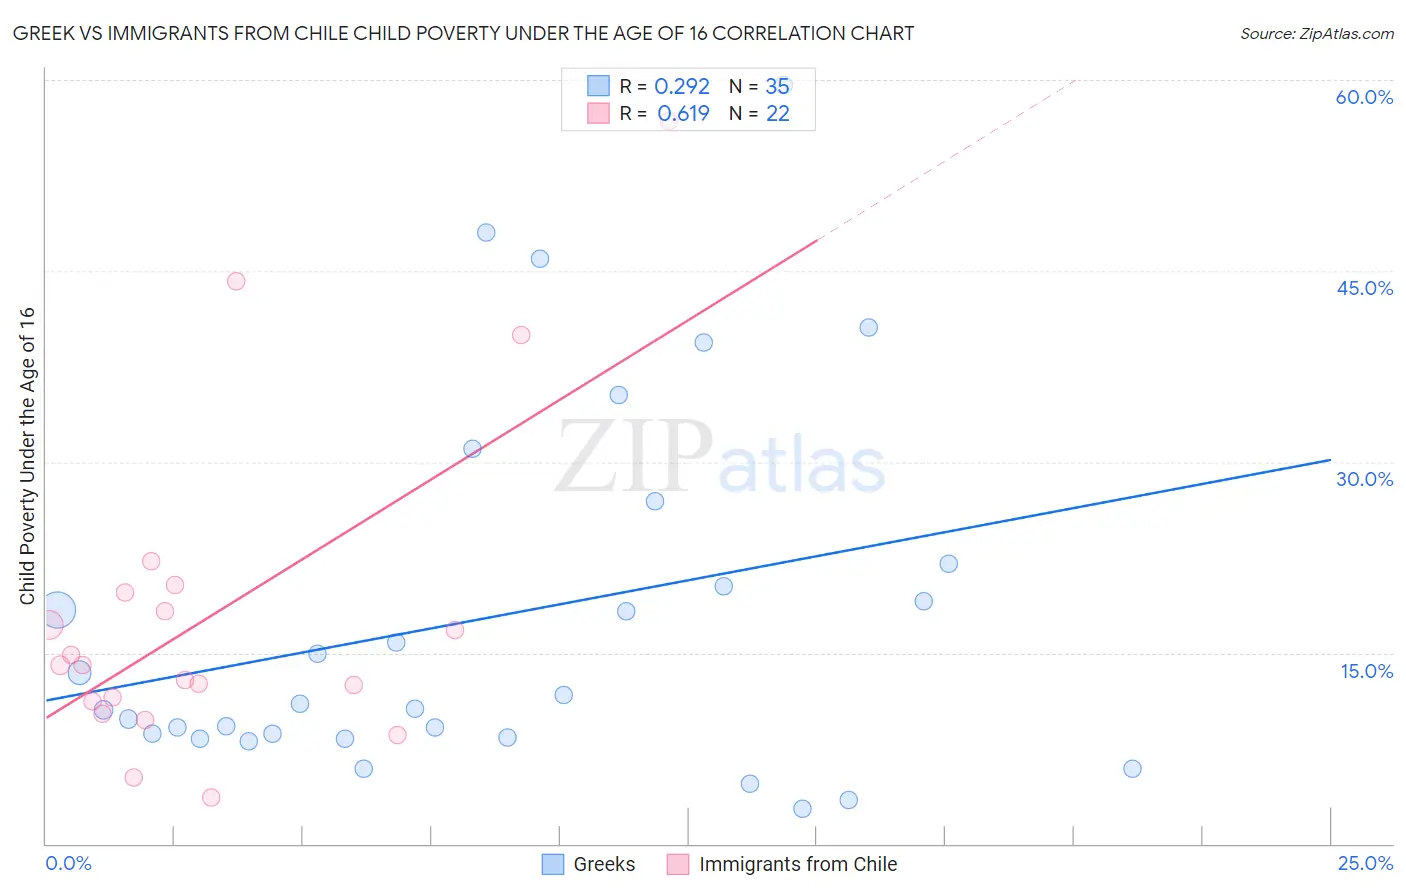 Greek vs Immigrants from Chile Child Poverty Under the Age of 16